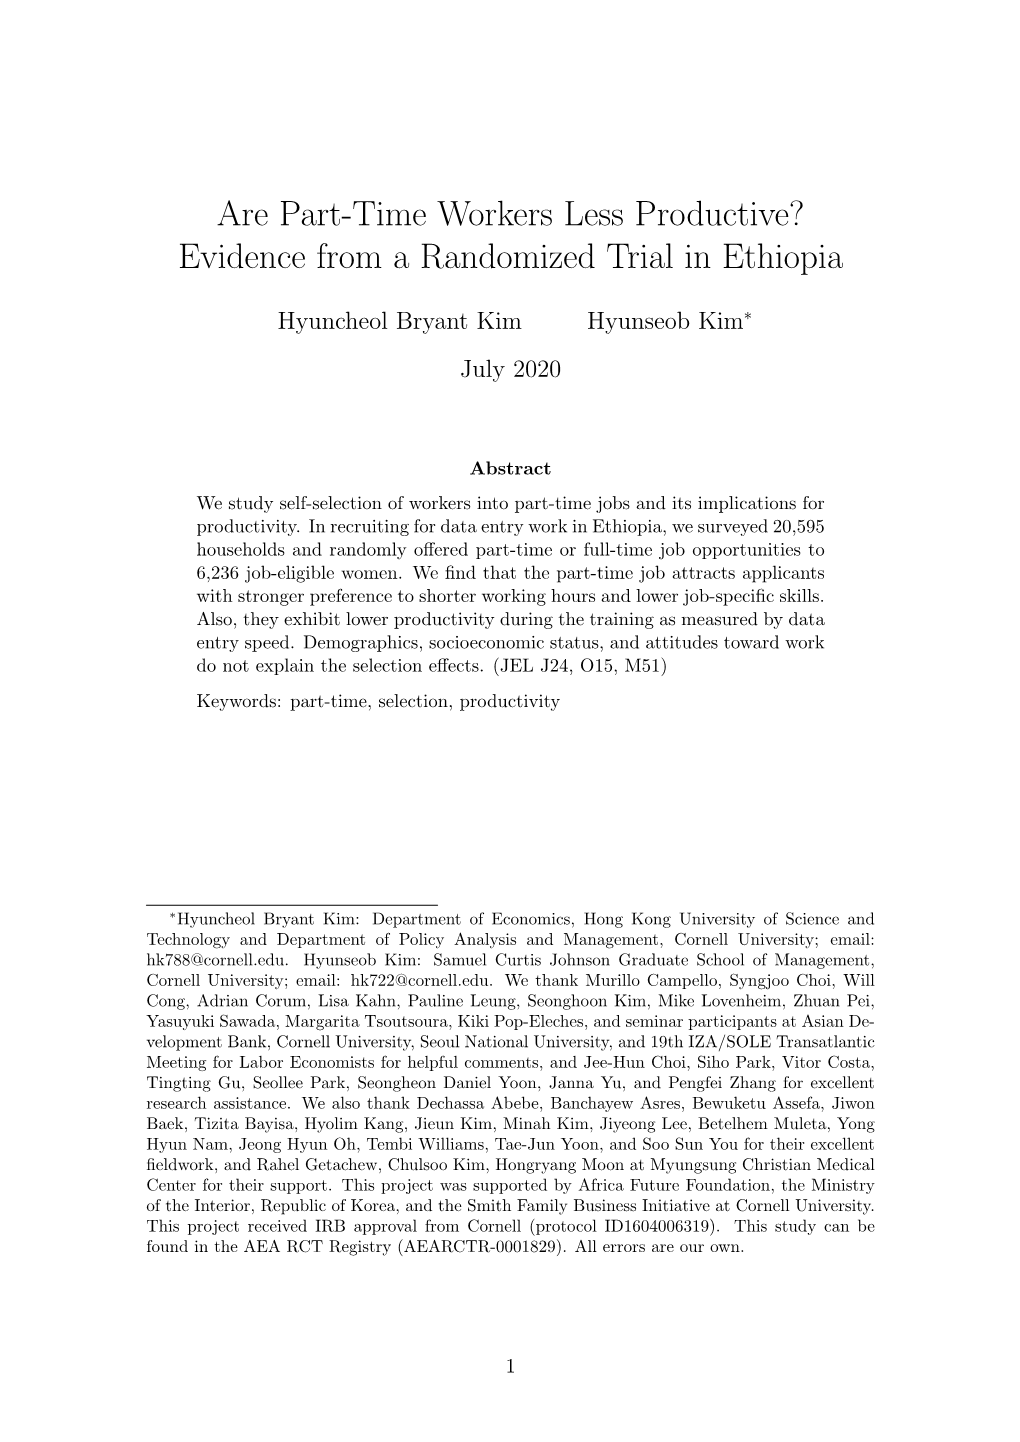 Are Part-Time Workers Less Productive? Evidence from a Randomized Trial in Ethiopia